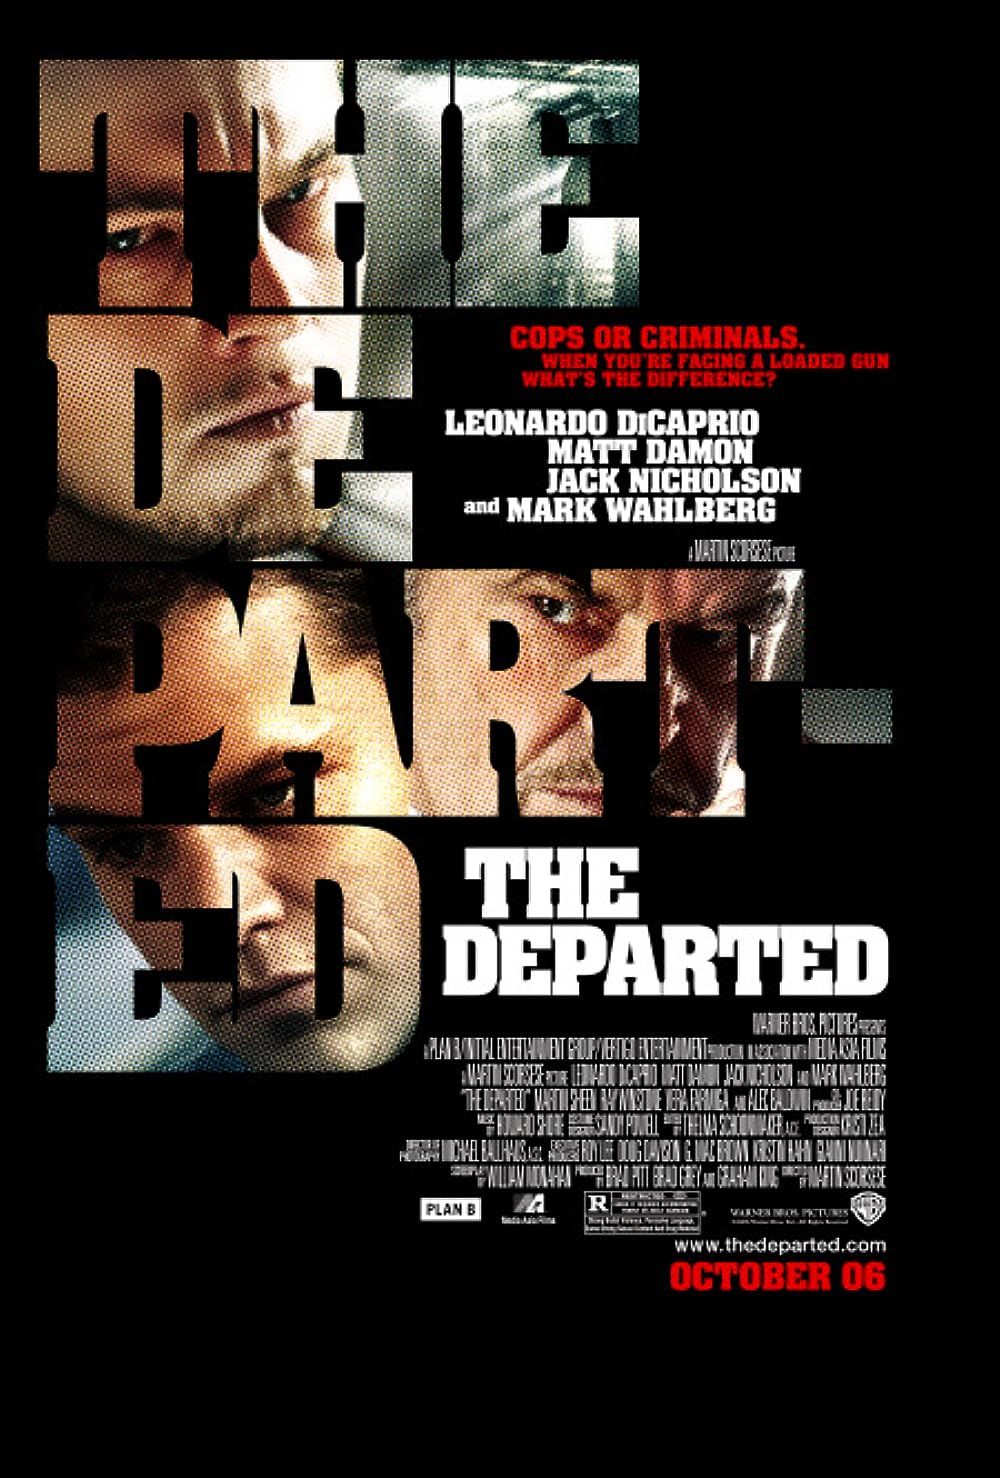 Poster of The Departed 2006 with Leonardo DiCaprio, Jack Nicholson, and Matt Damon